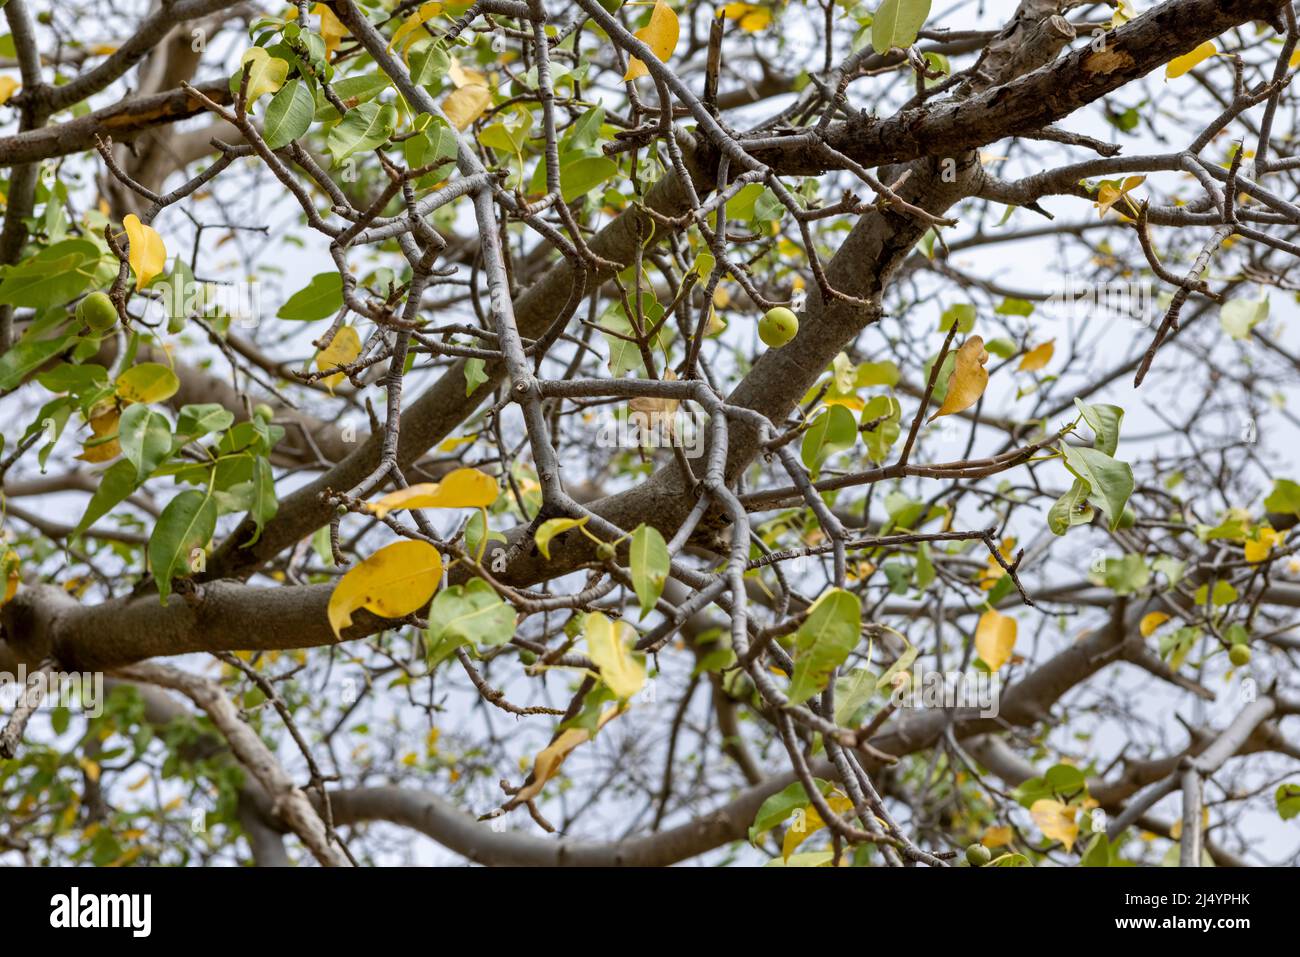 Manchineel tree with poisonous fruits at Playa Jeremi on the Caribbean island Curacao Stock Photo